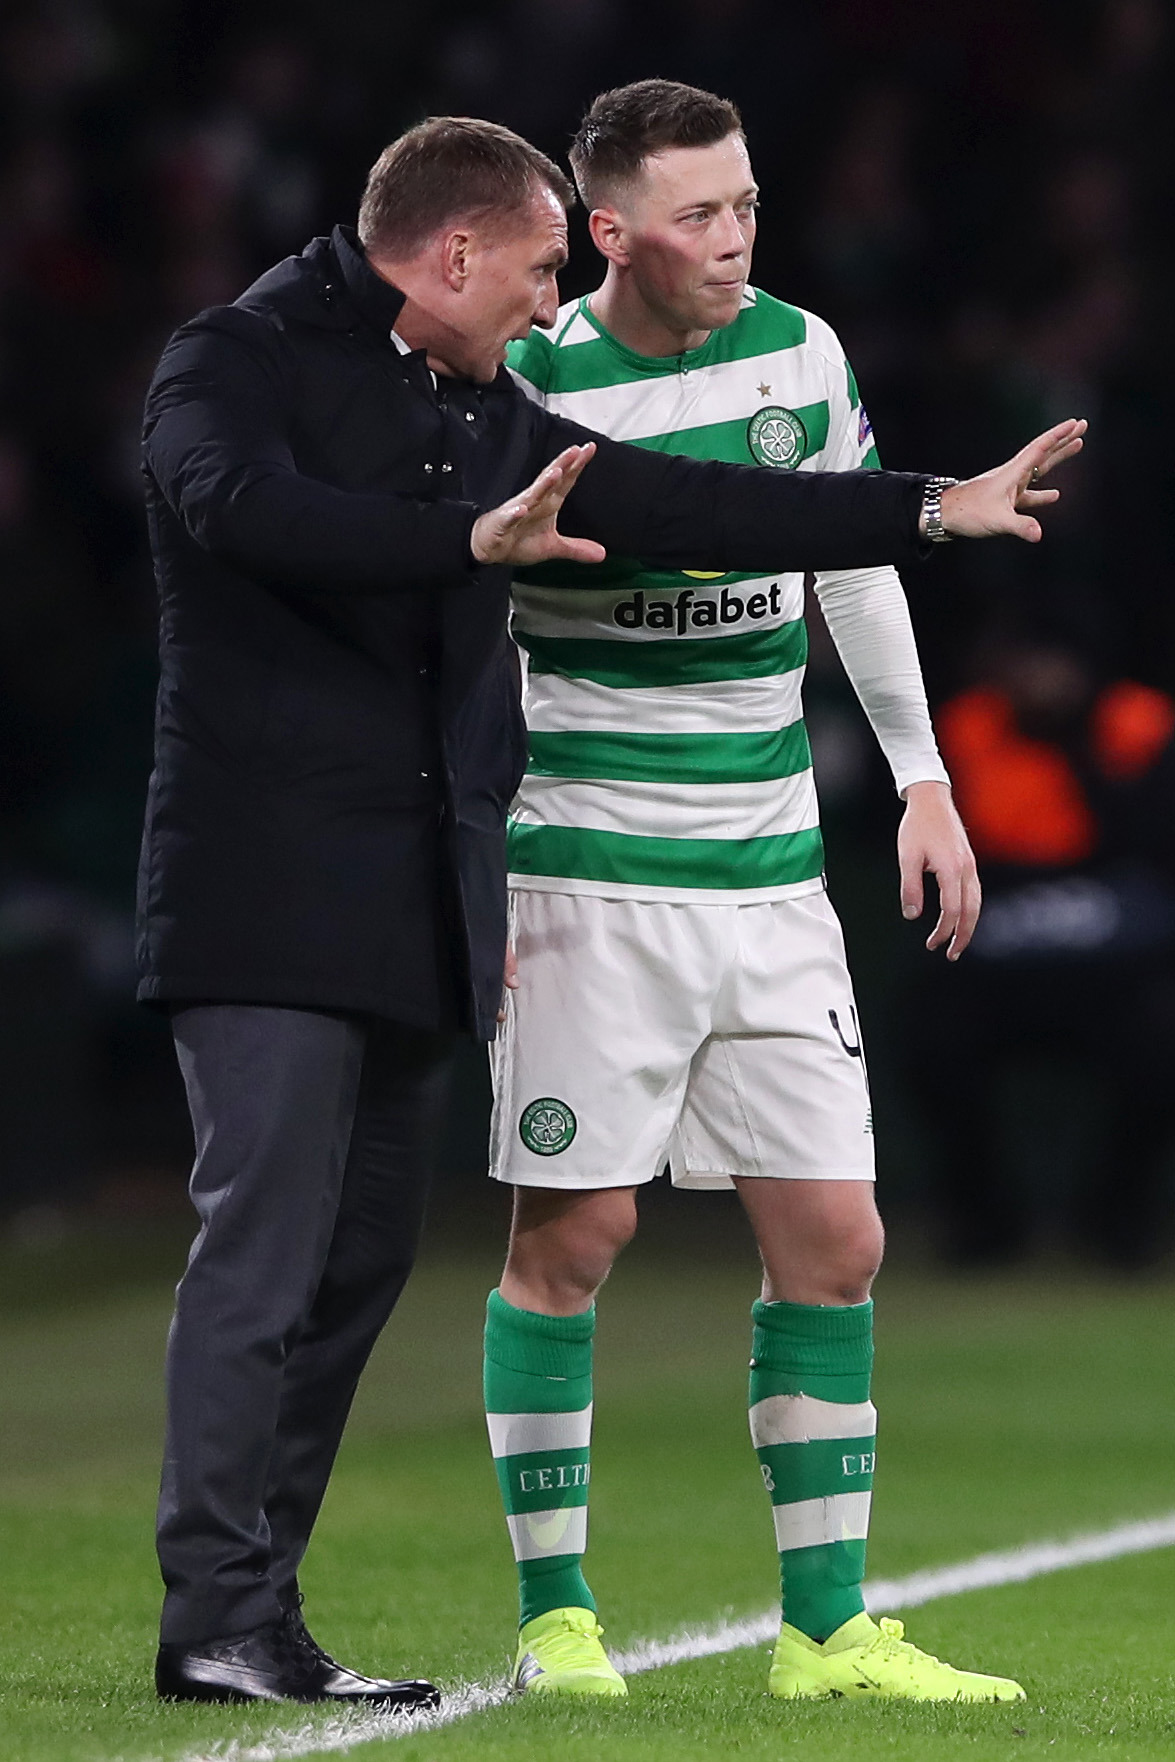 There S So Much More To Him Callum McGregor S Intriguing Insight On Celtic Boss